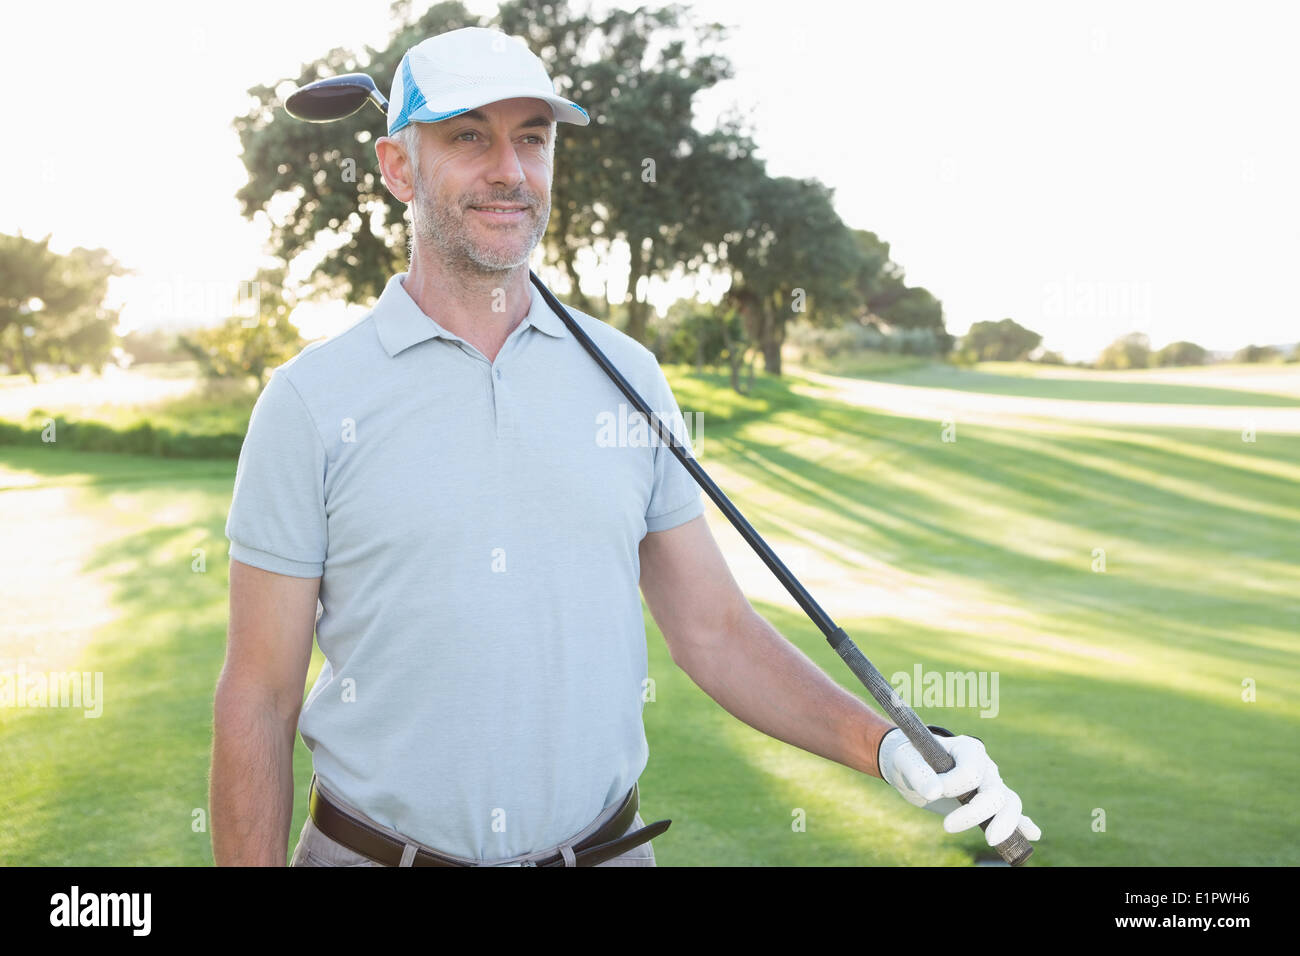 Smiling handsome golfer looking ahead Stock Photo